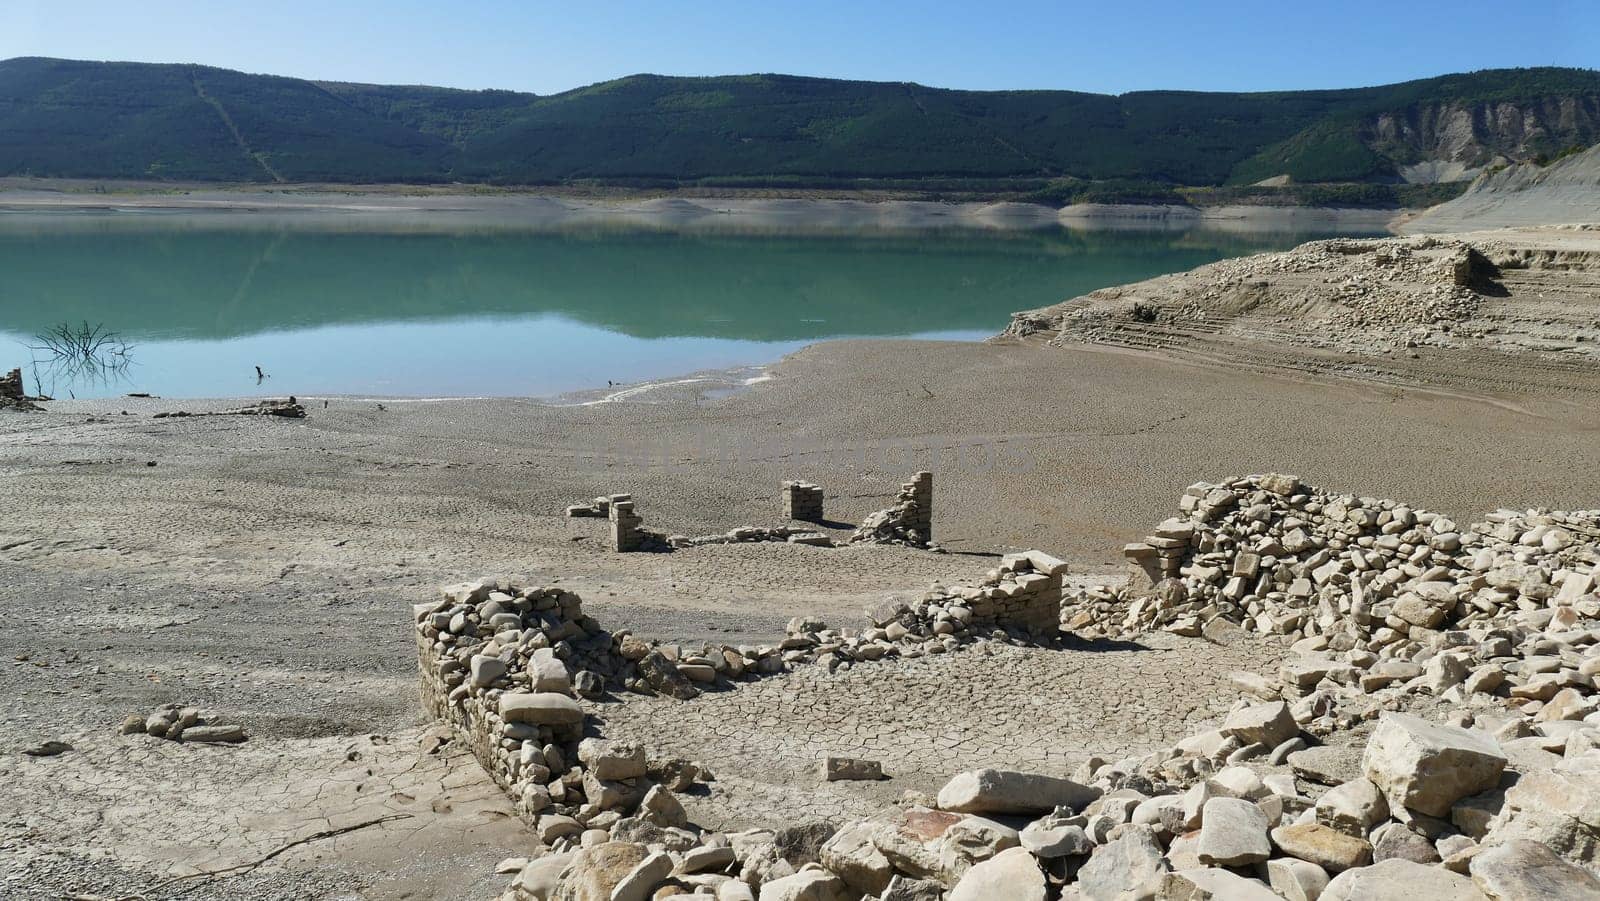 Low water level and remains of the ruins of the Yesa reservoir in Navarre - October, 2019 by XabiDonostia